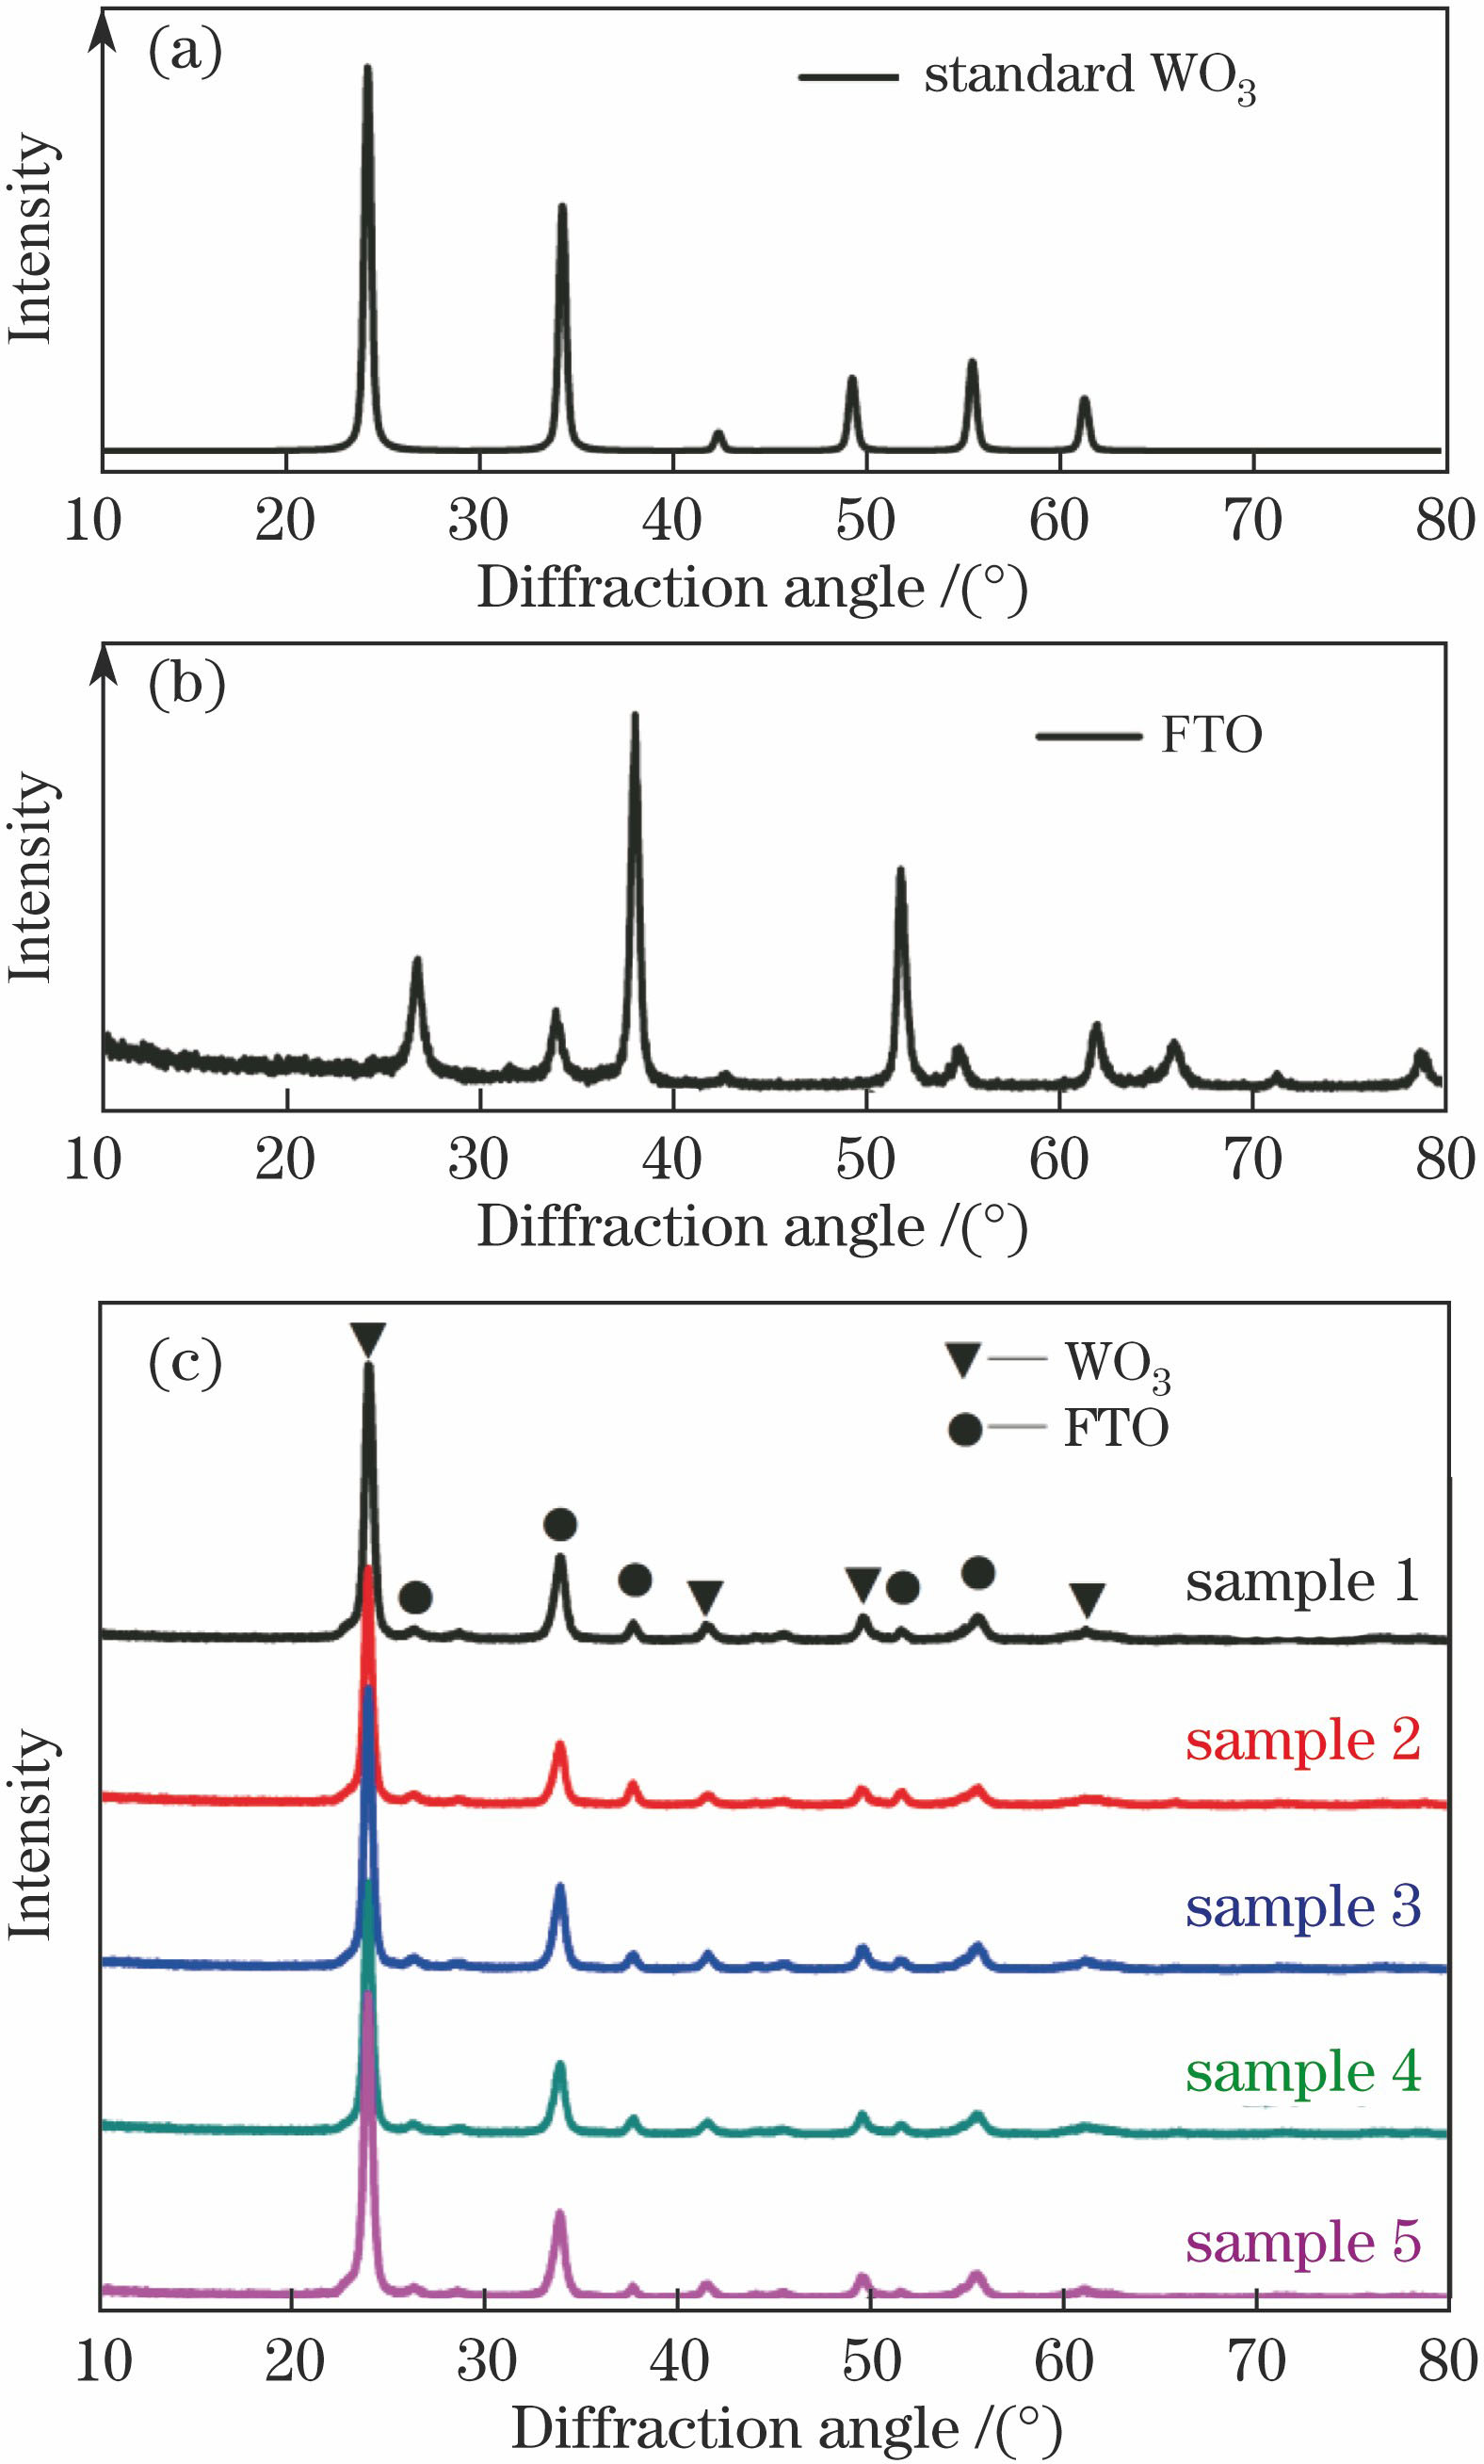 XRD patterns of (a) standard WO3, (b) FTO, and (c) WO3 films with different mixture ratios